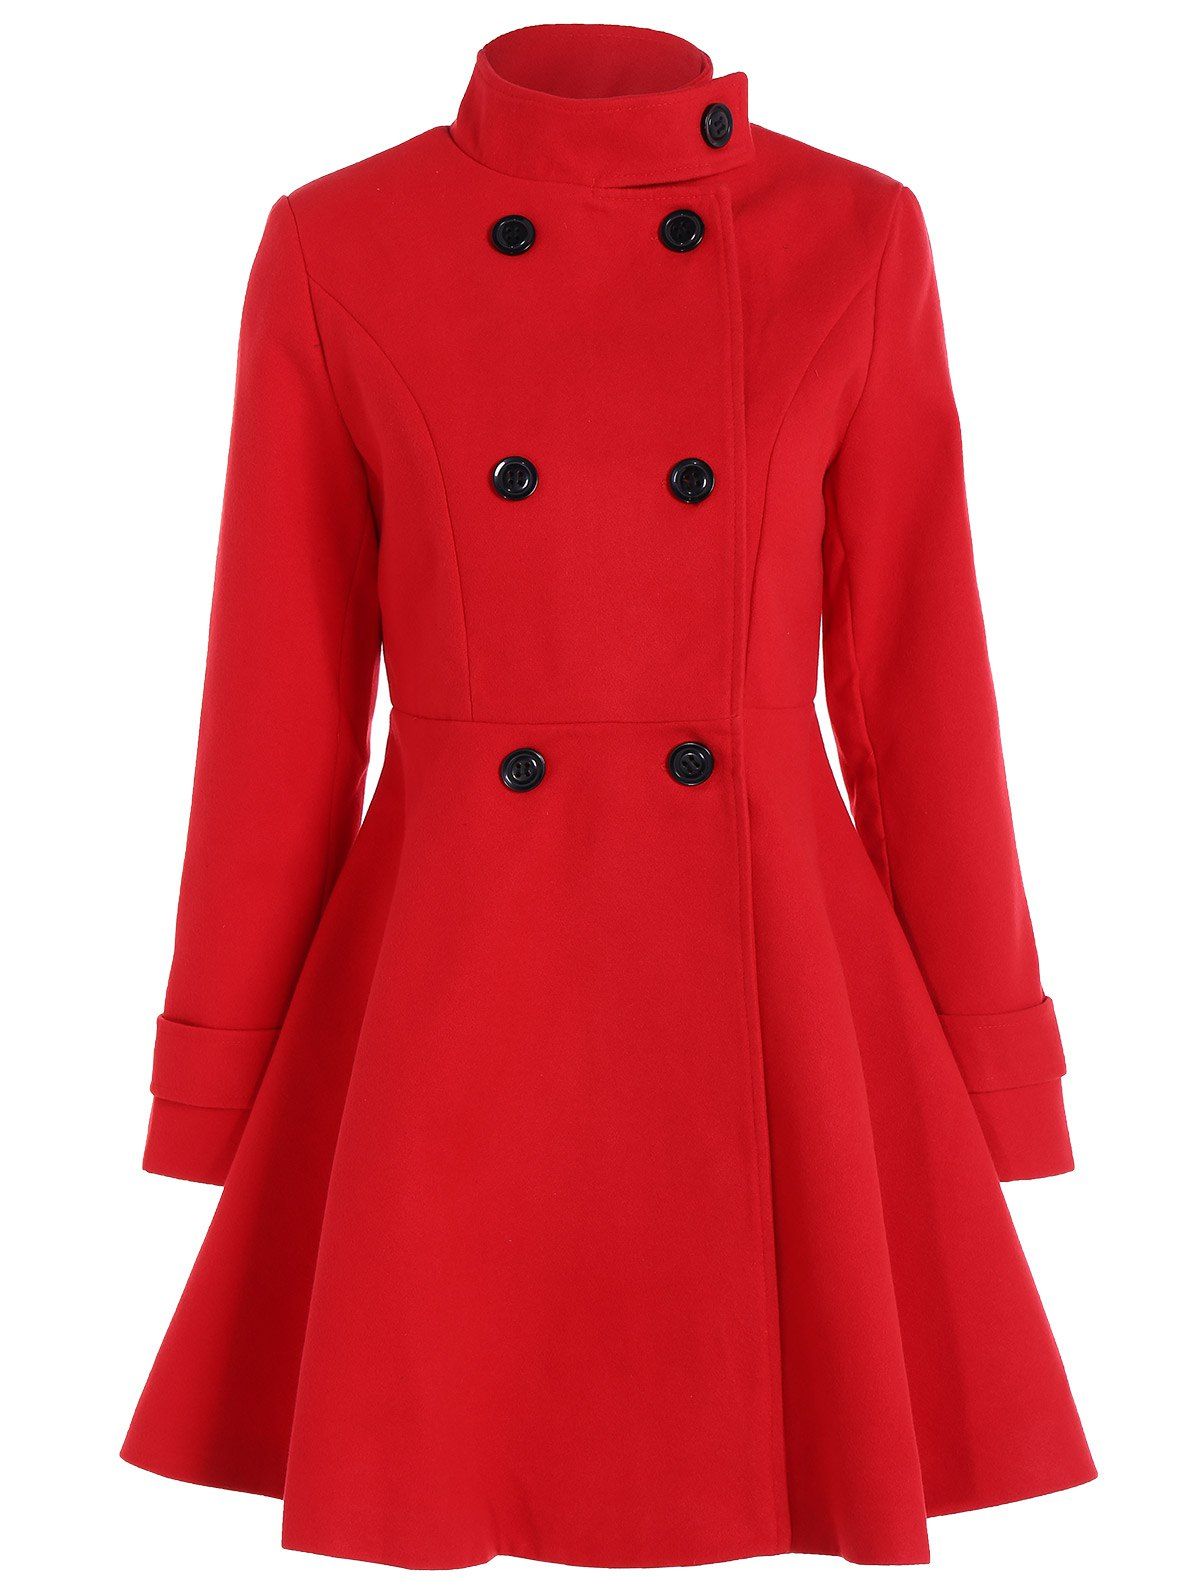 [17% OFF] 2021 Double Breasted Skirted Coat In RED | DressLily